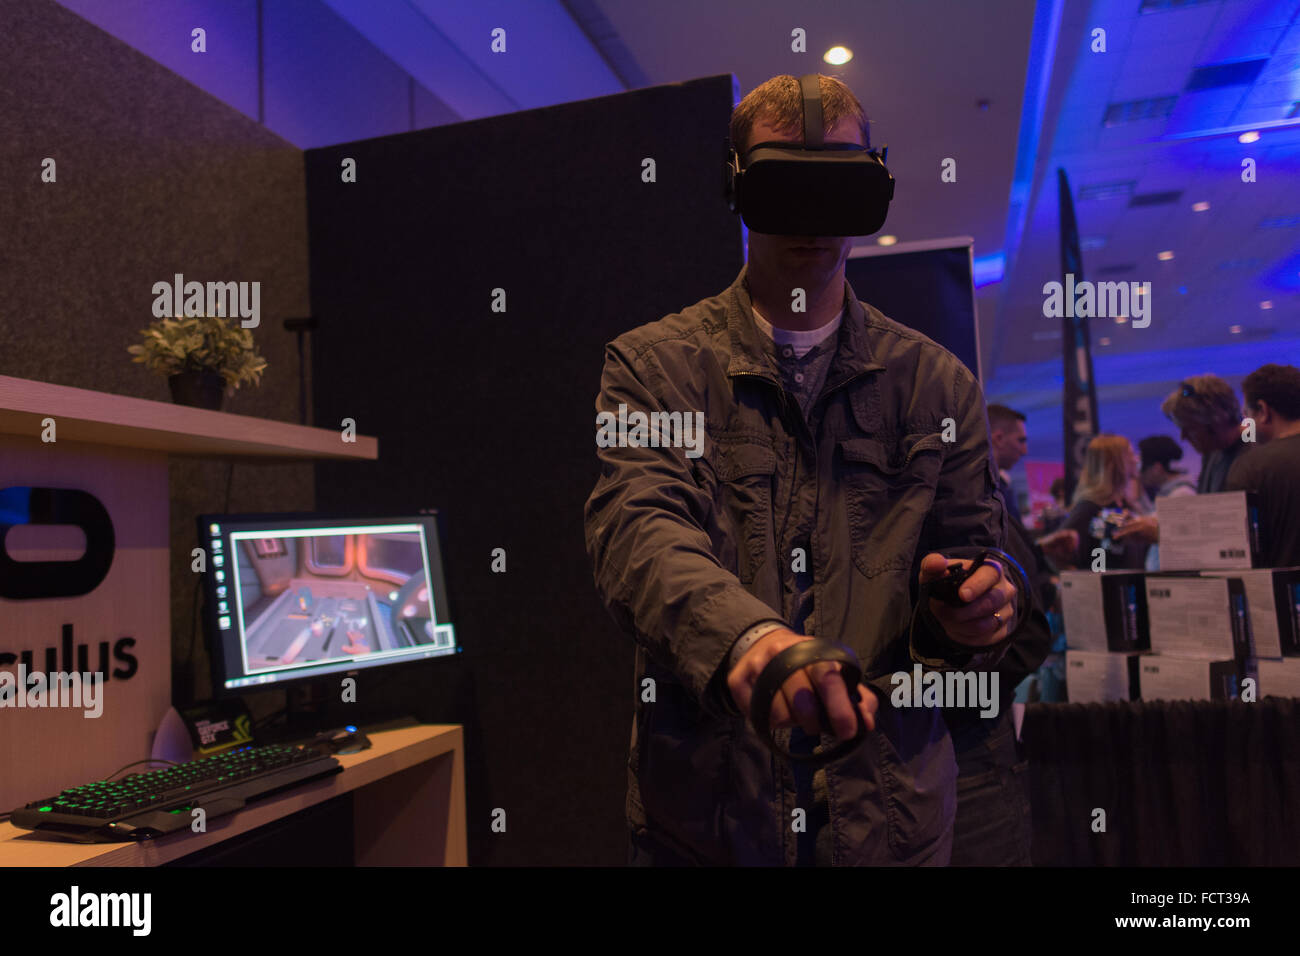 Los Angeles, USA - January 23, 2016: Man tries virtual reality headset and hand controls during VRLA Expo Winter, virtual realit Stock Photo